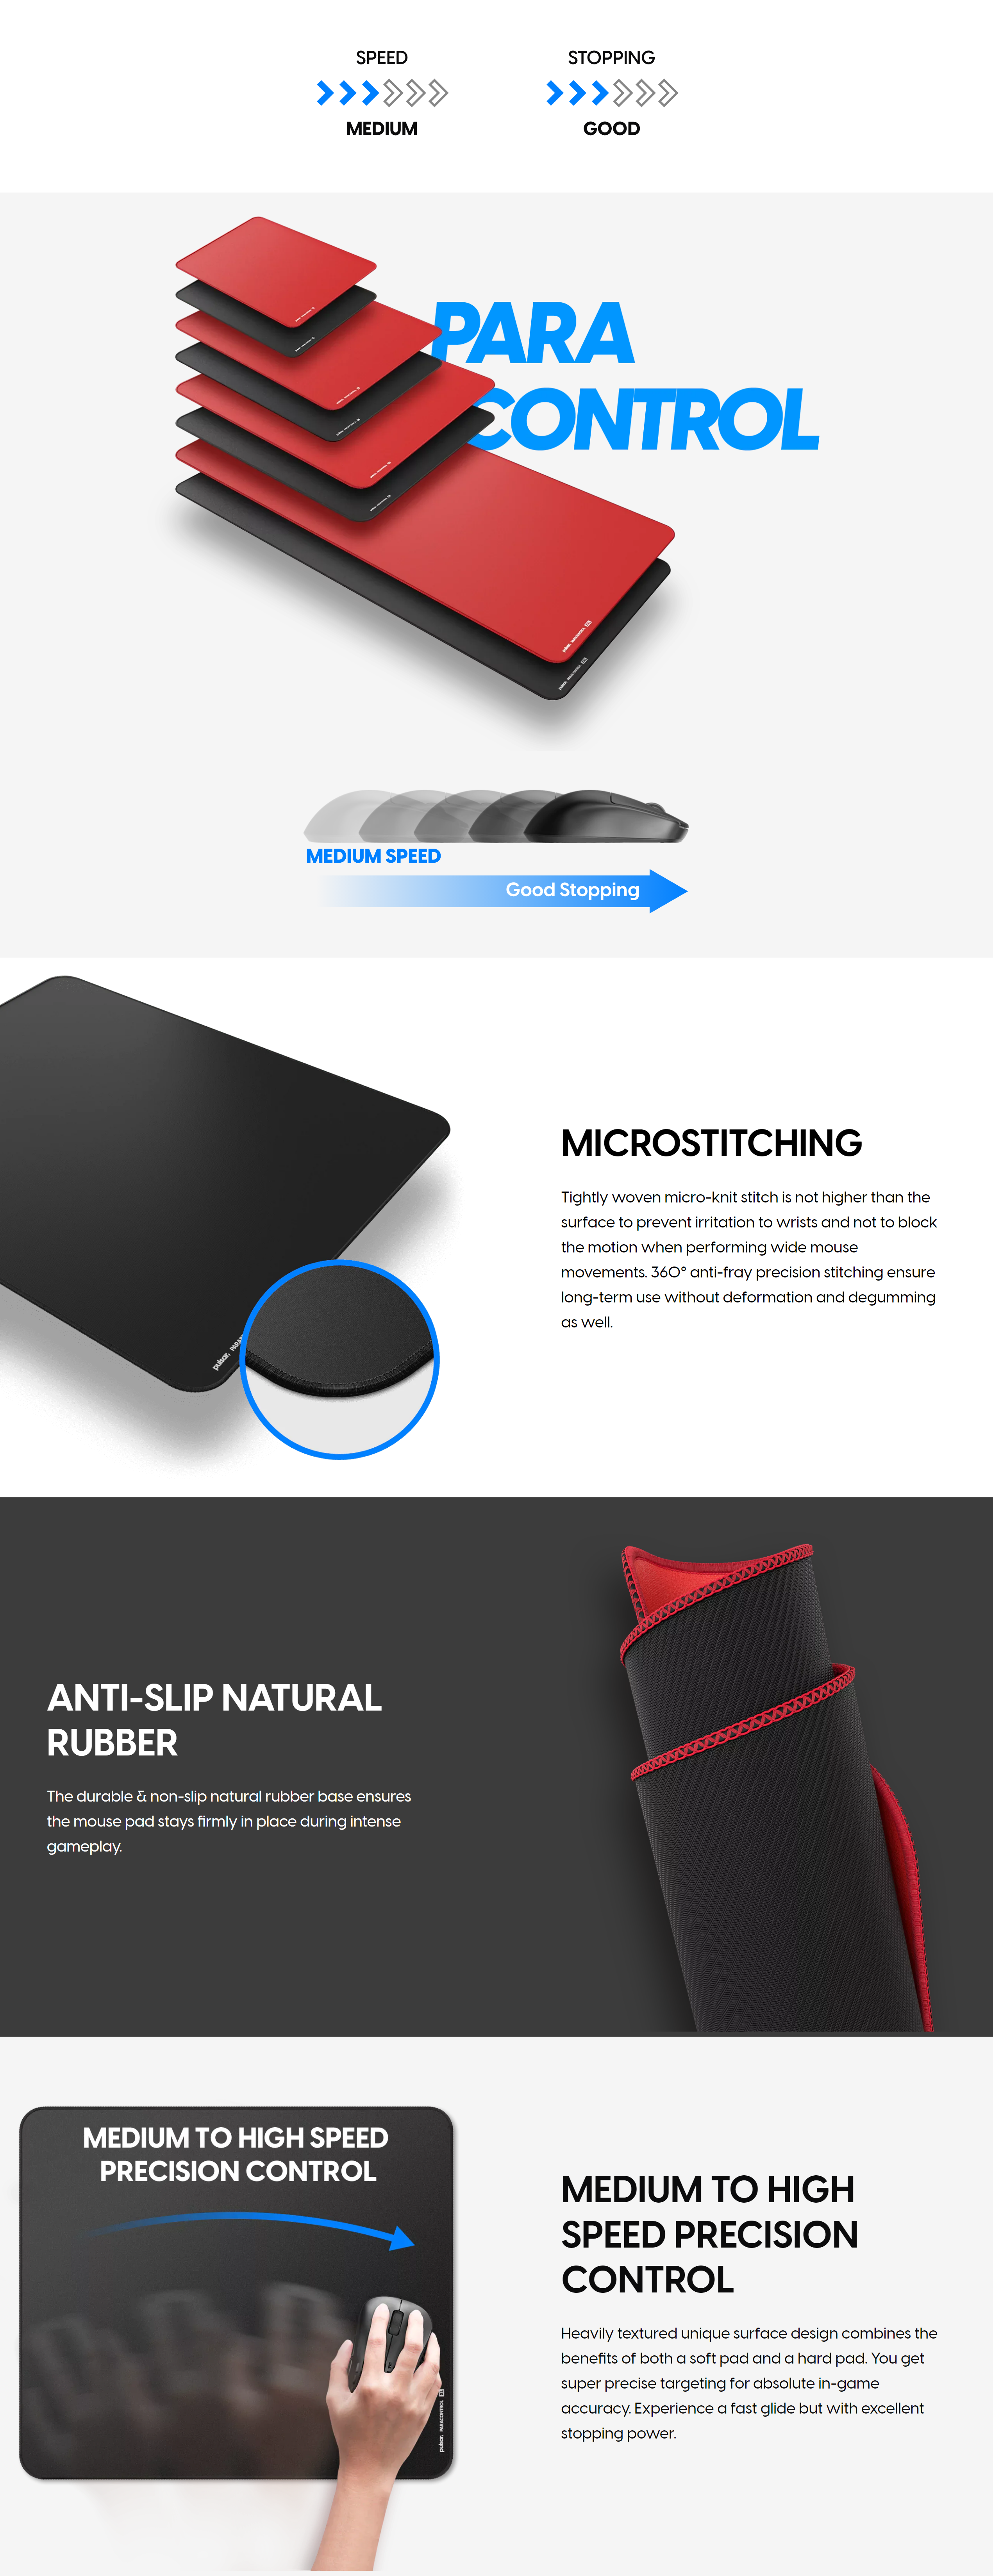 A large marketing image providing additional information about the product Pulsar Paracontrol V2 Mousepad Two XL - RedV - Additional alt info not provided